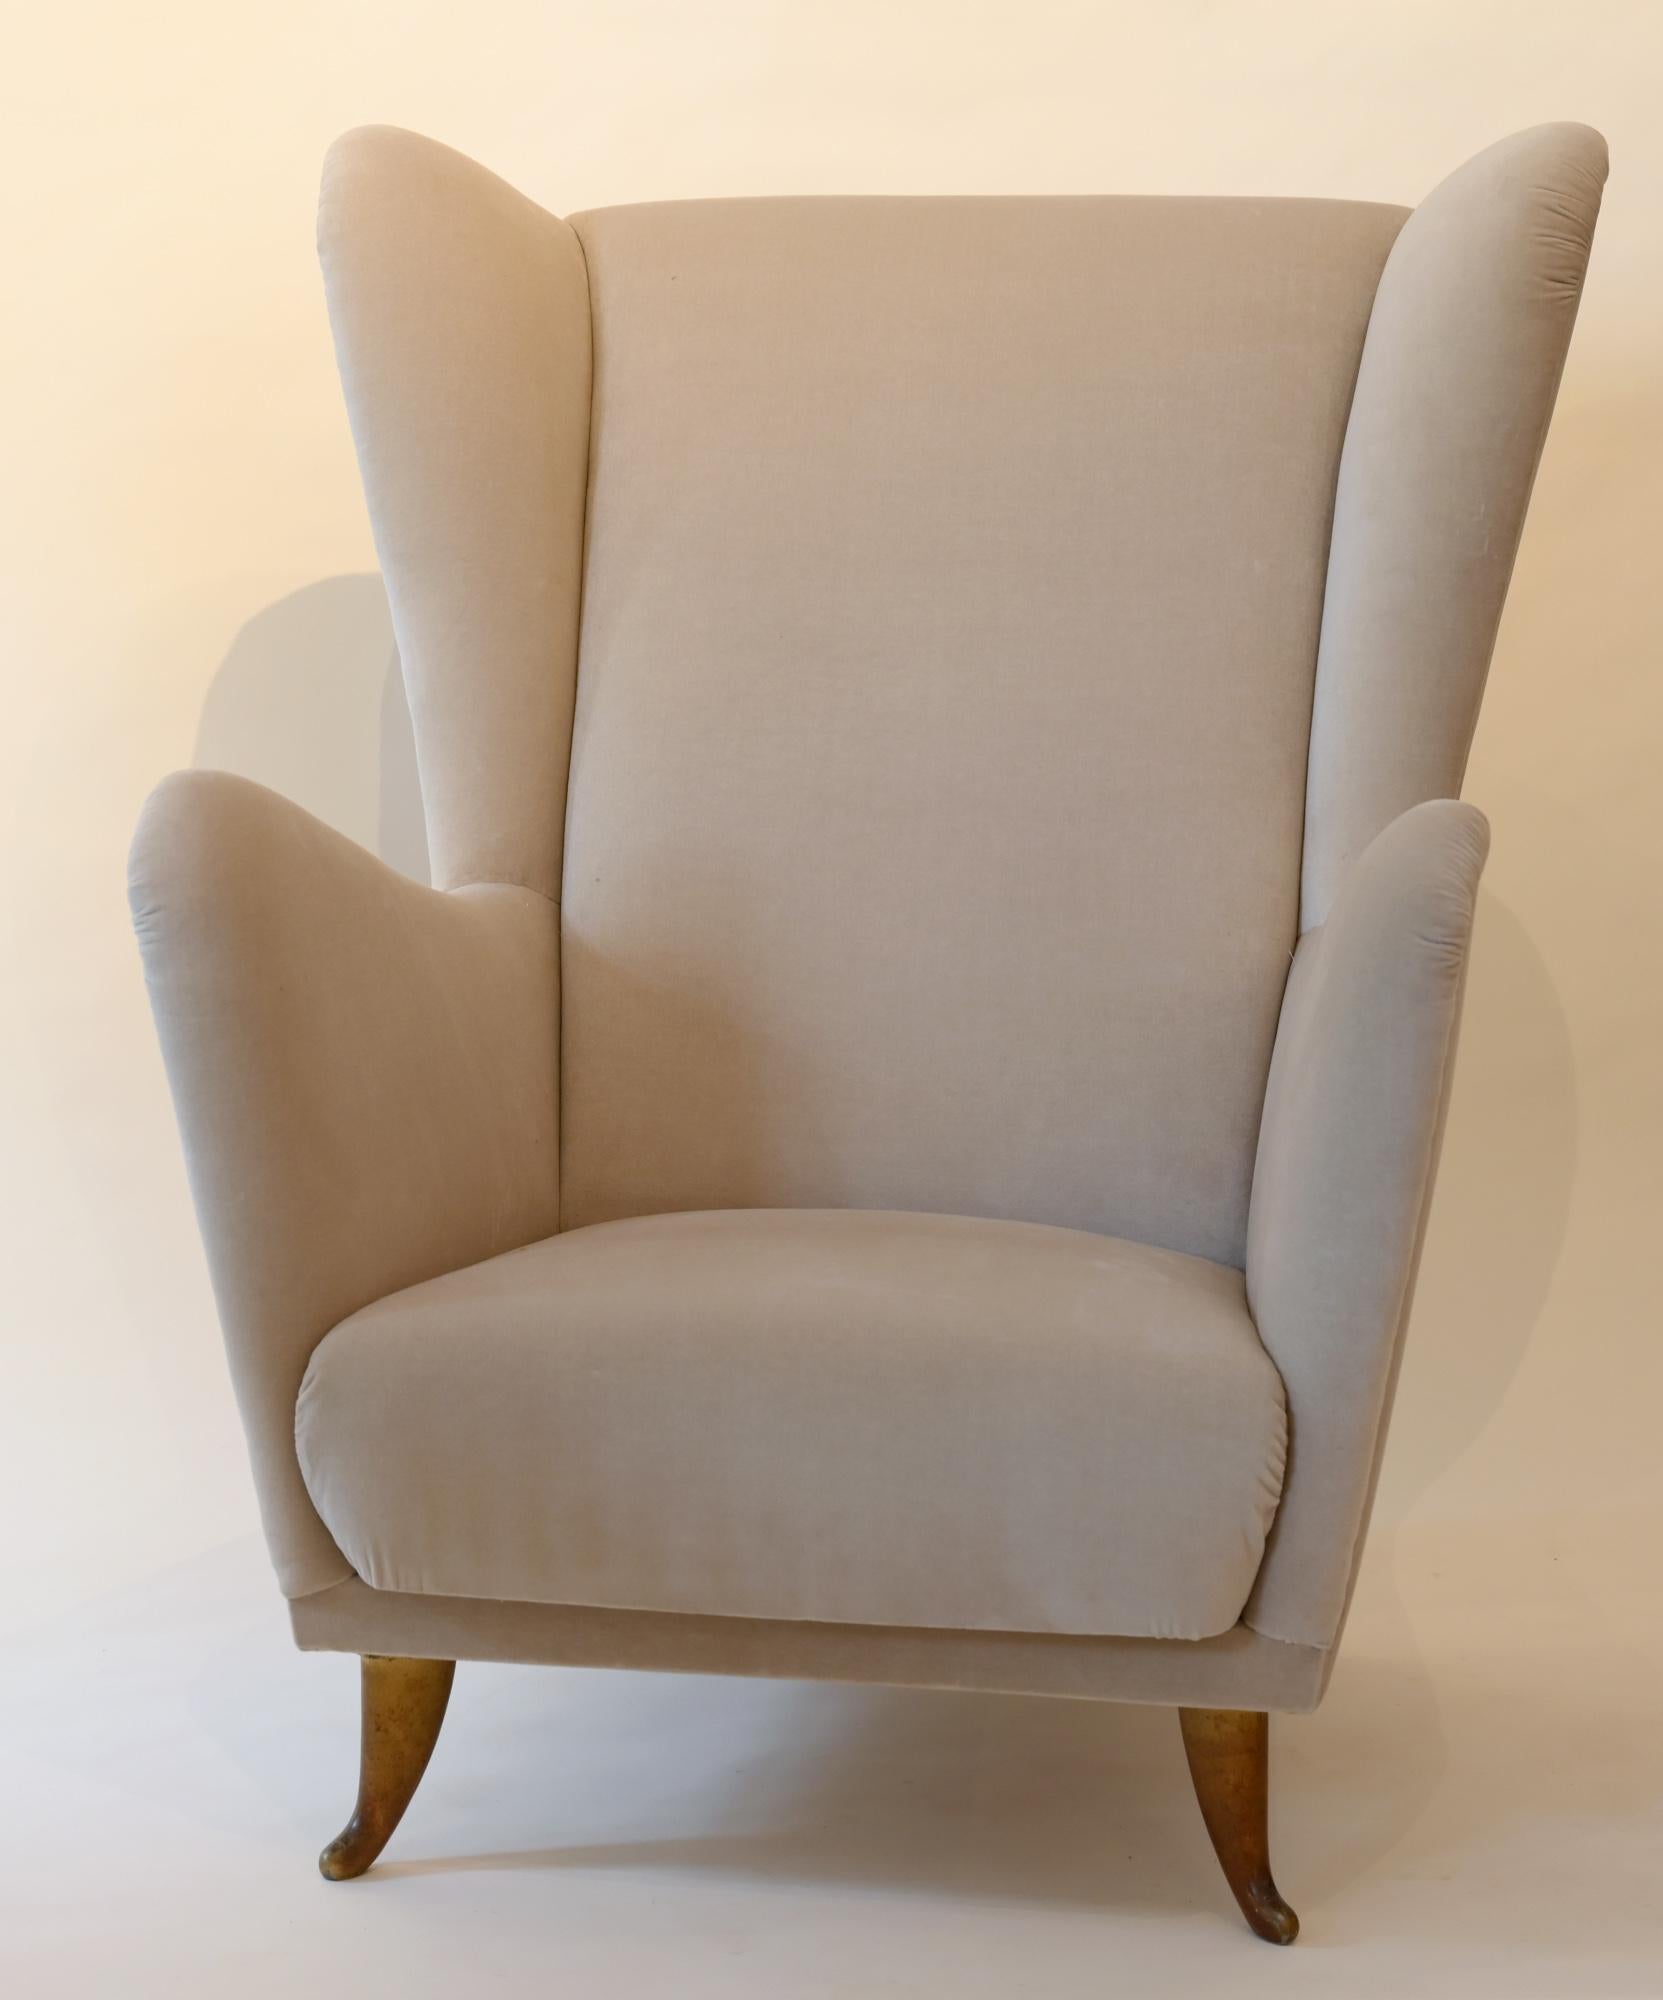 Mid-Century Modern Pair of Armchairs Isa Bergamo with Brass Legs, Midcentury 1950 Italy For Sale